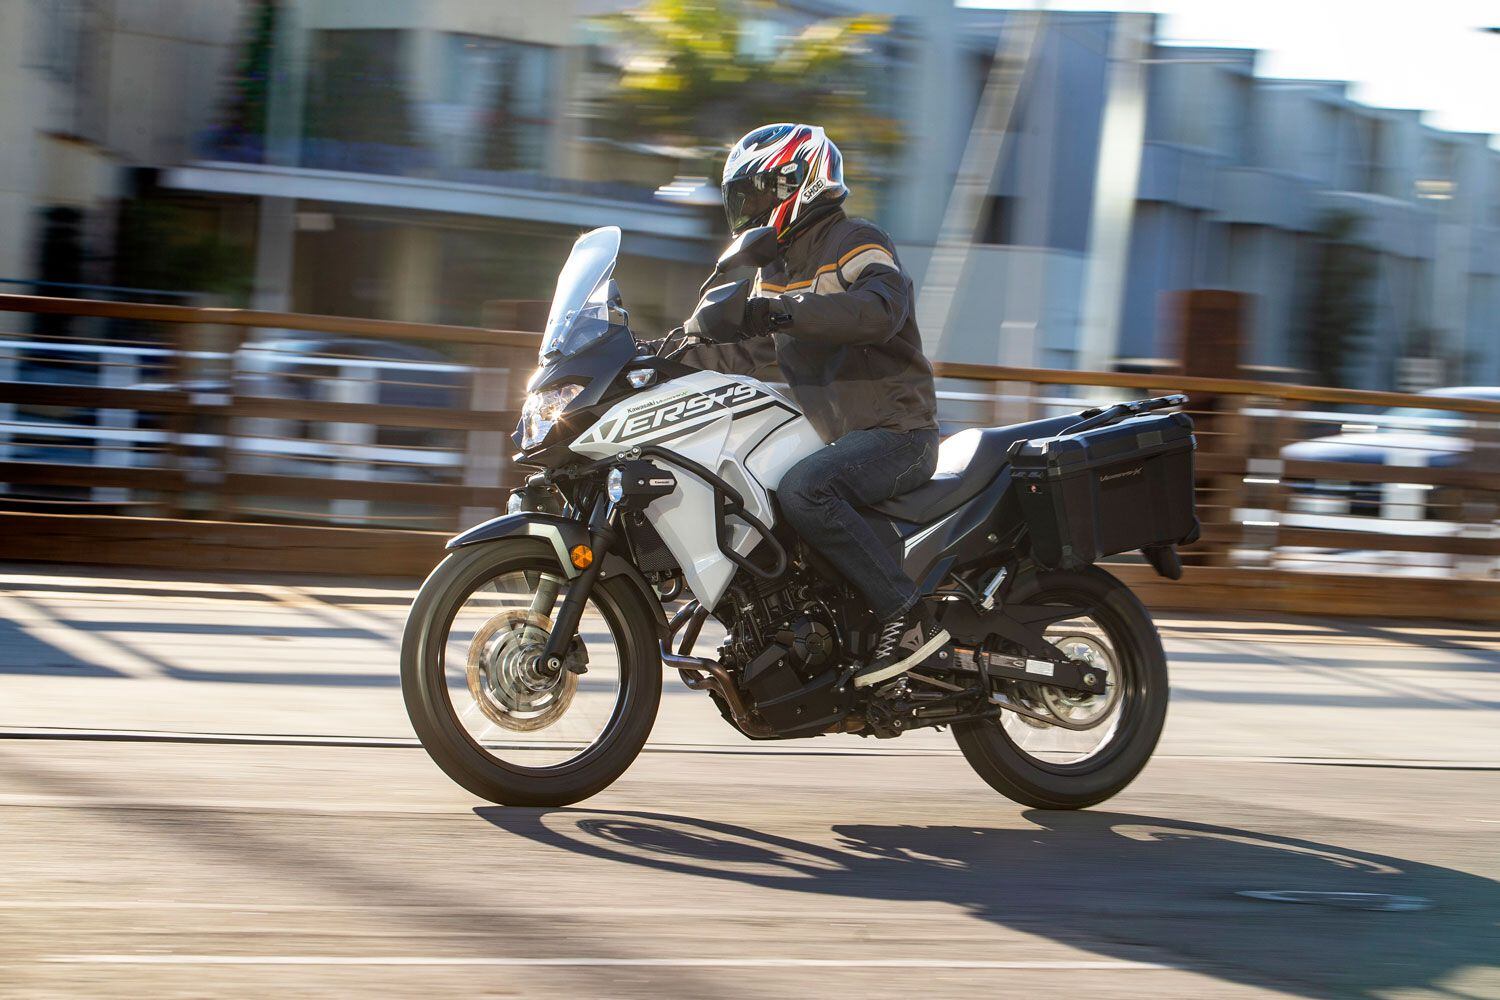 Stand or sit, the Versys-X 300 is comfortable either way.